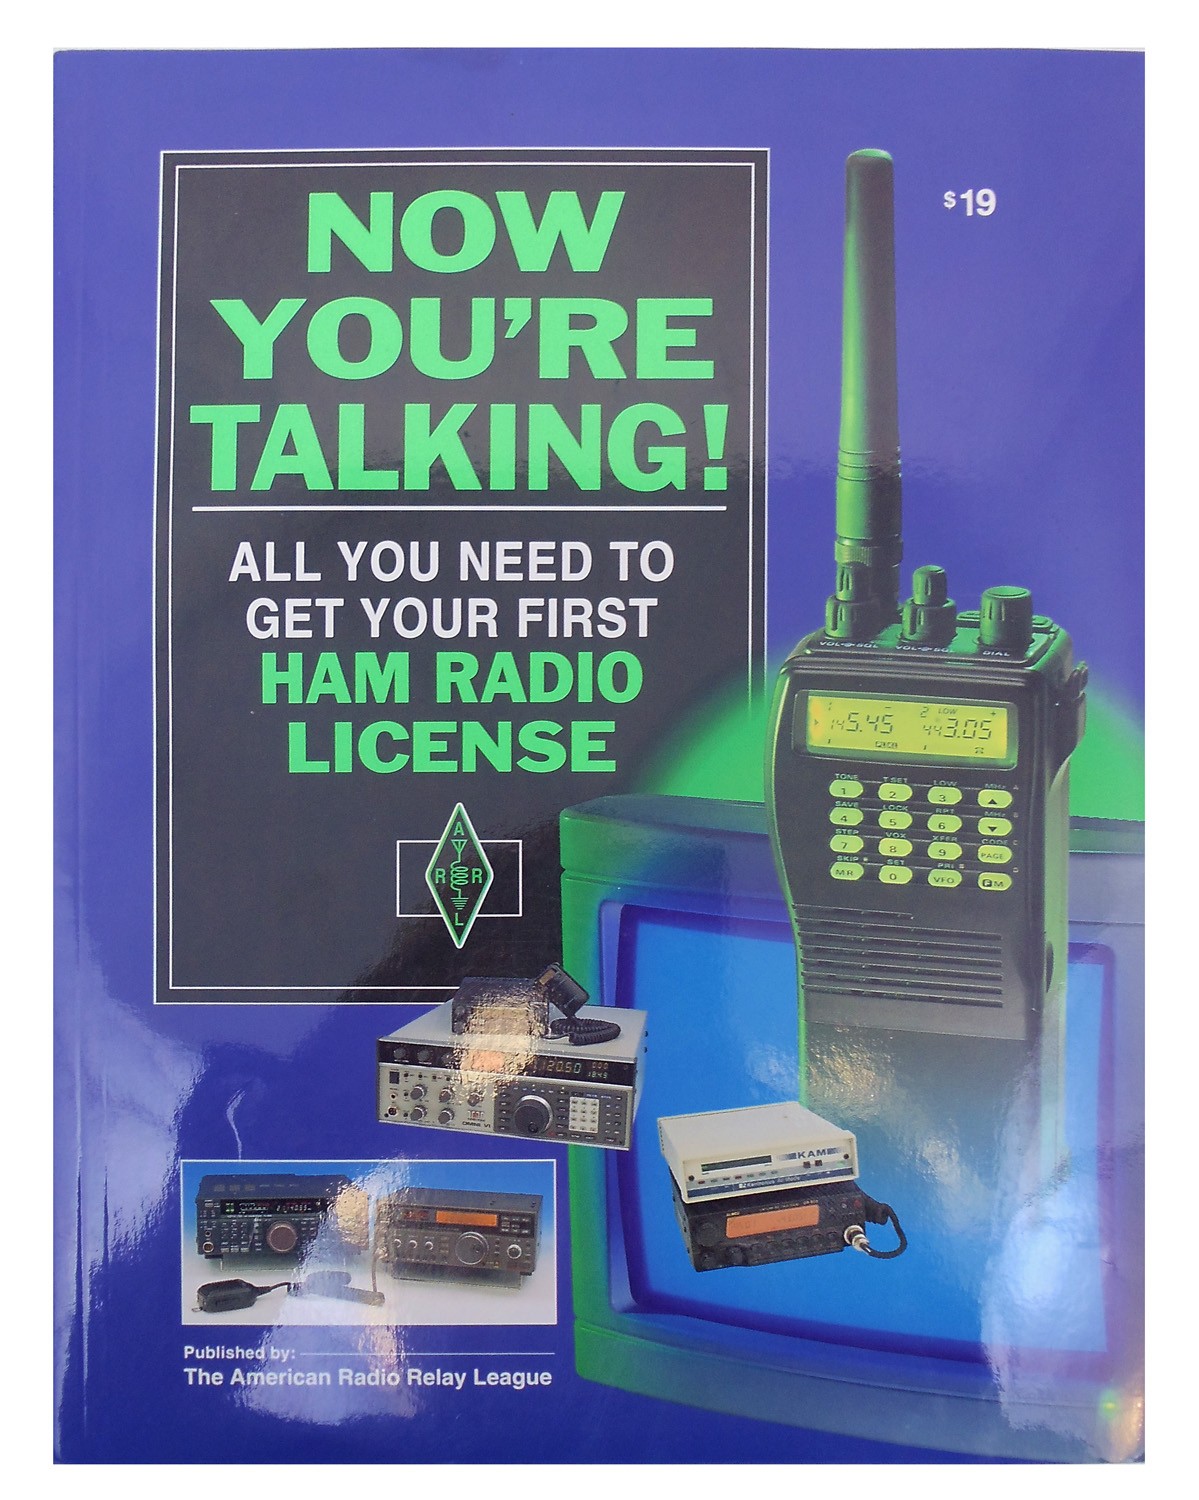 391 PAGE MANUAL TO GET FIRST HAM RADIO LICENSE